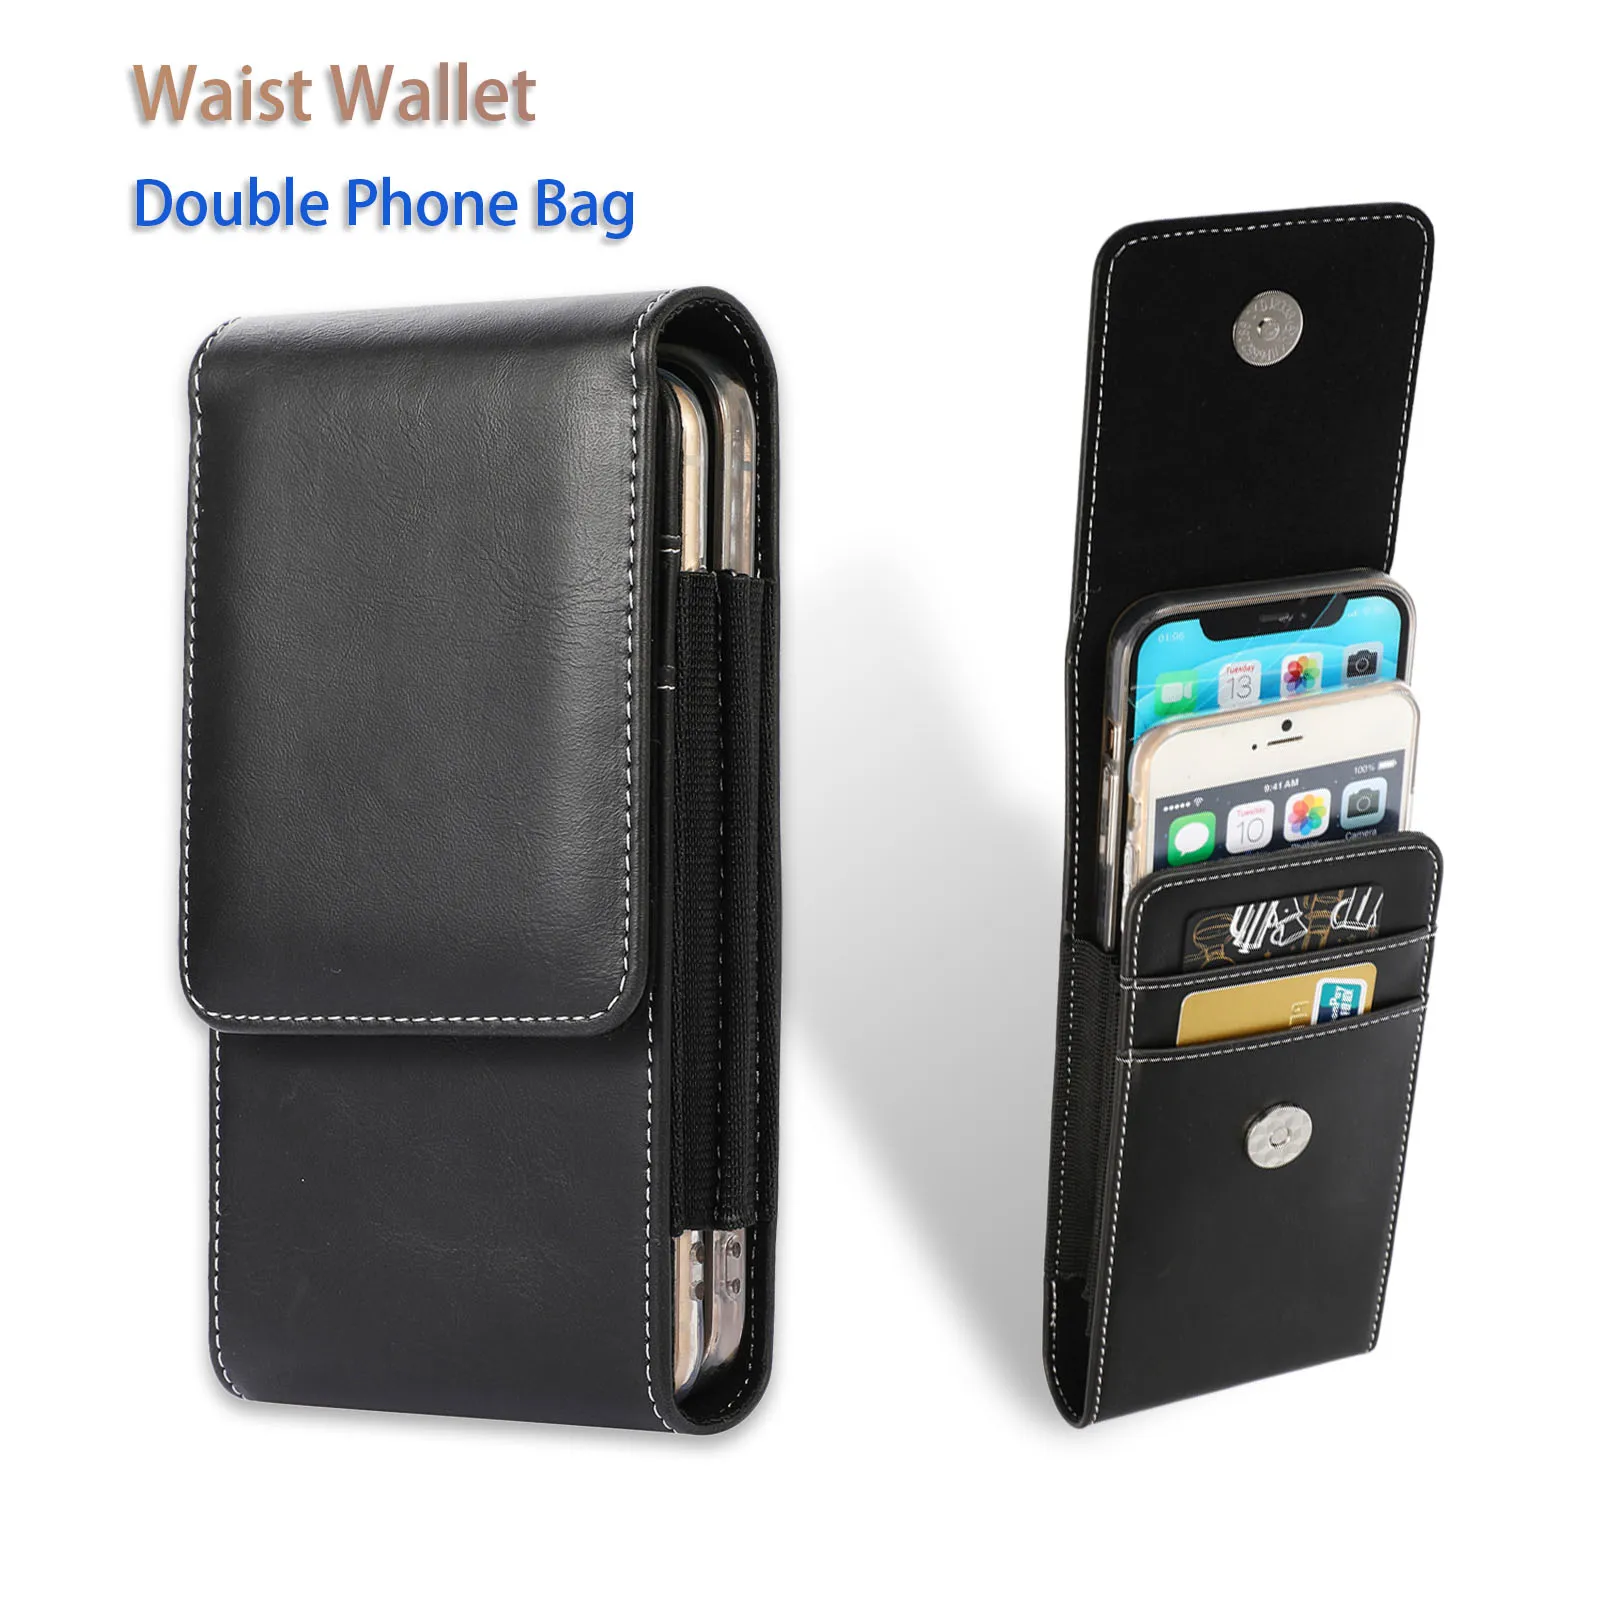 Leather Dual Pouch Wallet Card Holder Two Mobile Phone Belt Clip Case For iPhone Samsung Xiaomi Huawei 2 Holster Men Waist Bag